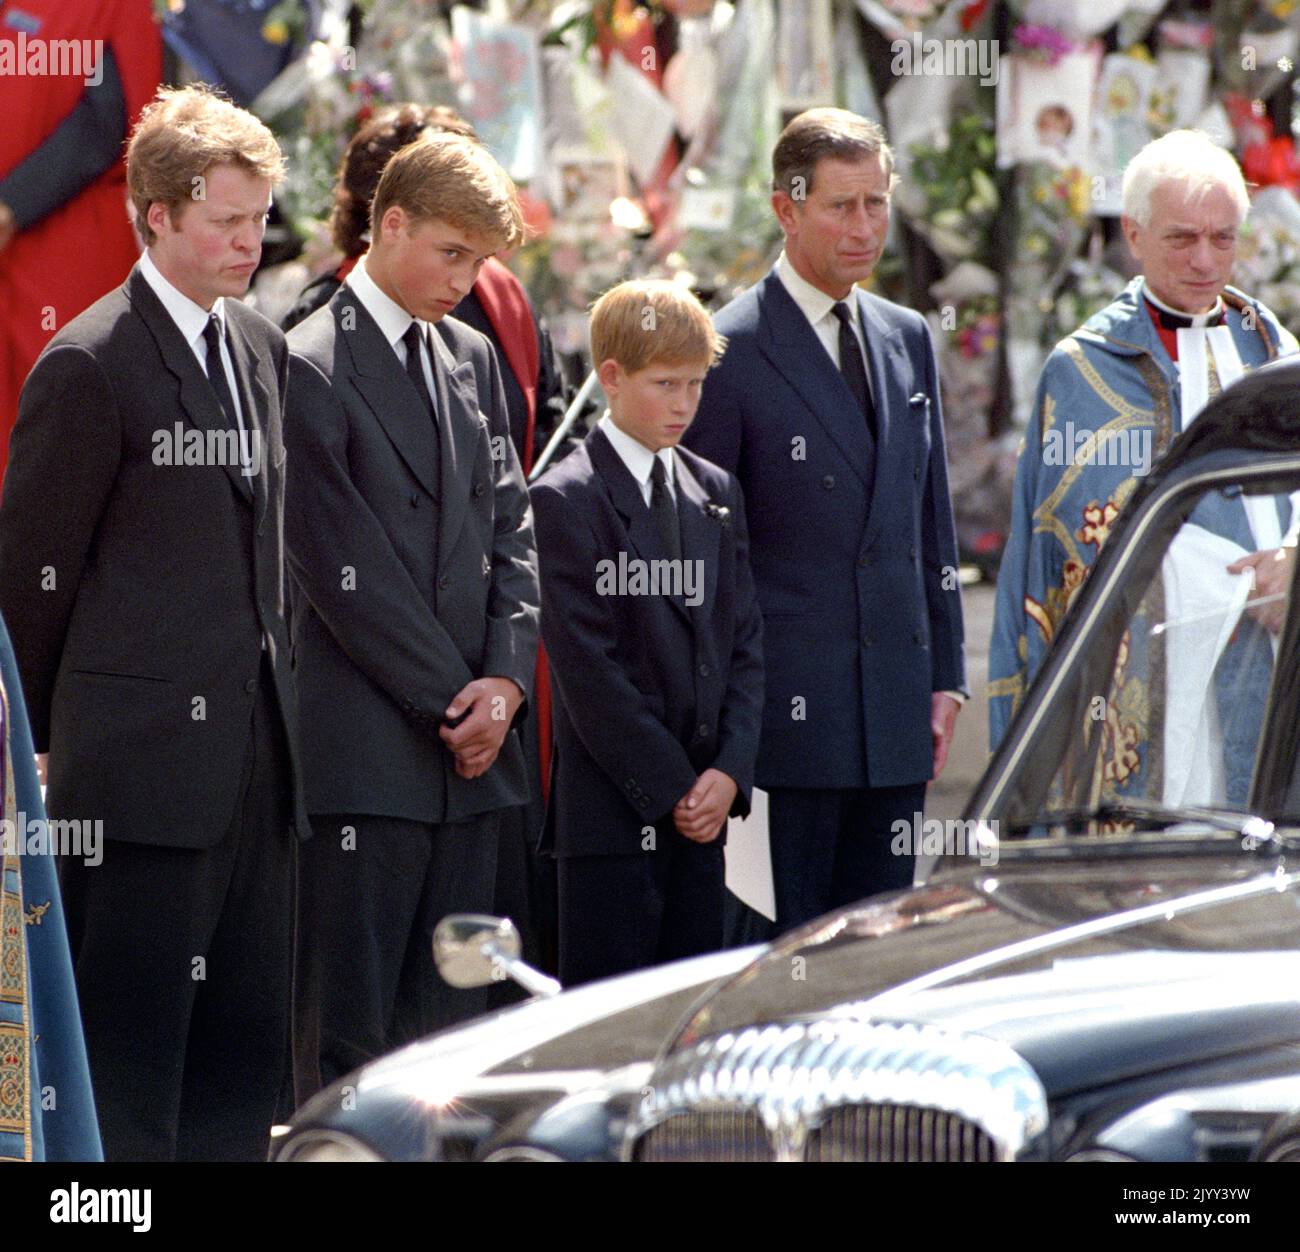 File photo dated 6/9/1997 of, from left, the Earl Spencer, Prince William, Prince Harry and the Prince of Wales waiting as as the hearse carrying the coffin of Diana, Princess of Wales prepares to leave Westminster Abbey following her funeral service. Issue date: Thursday September 8, 2022. Stock Photo